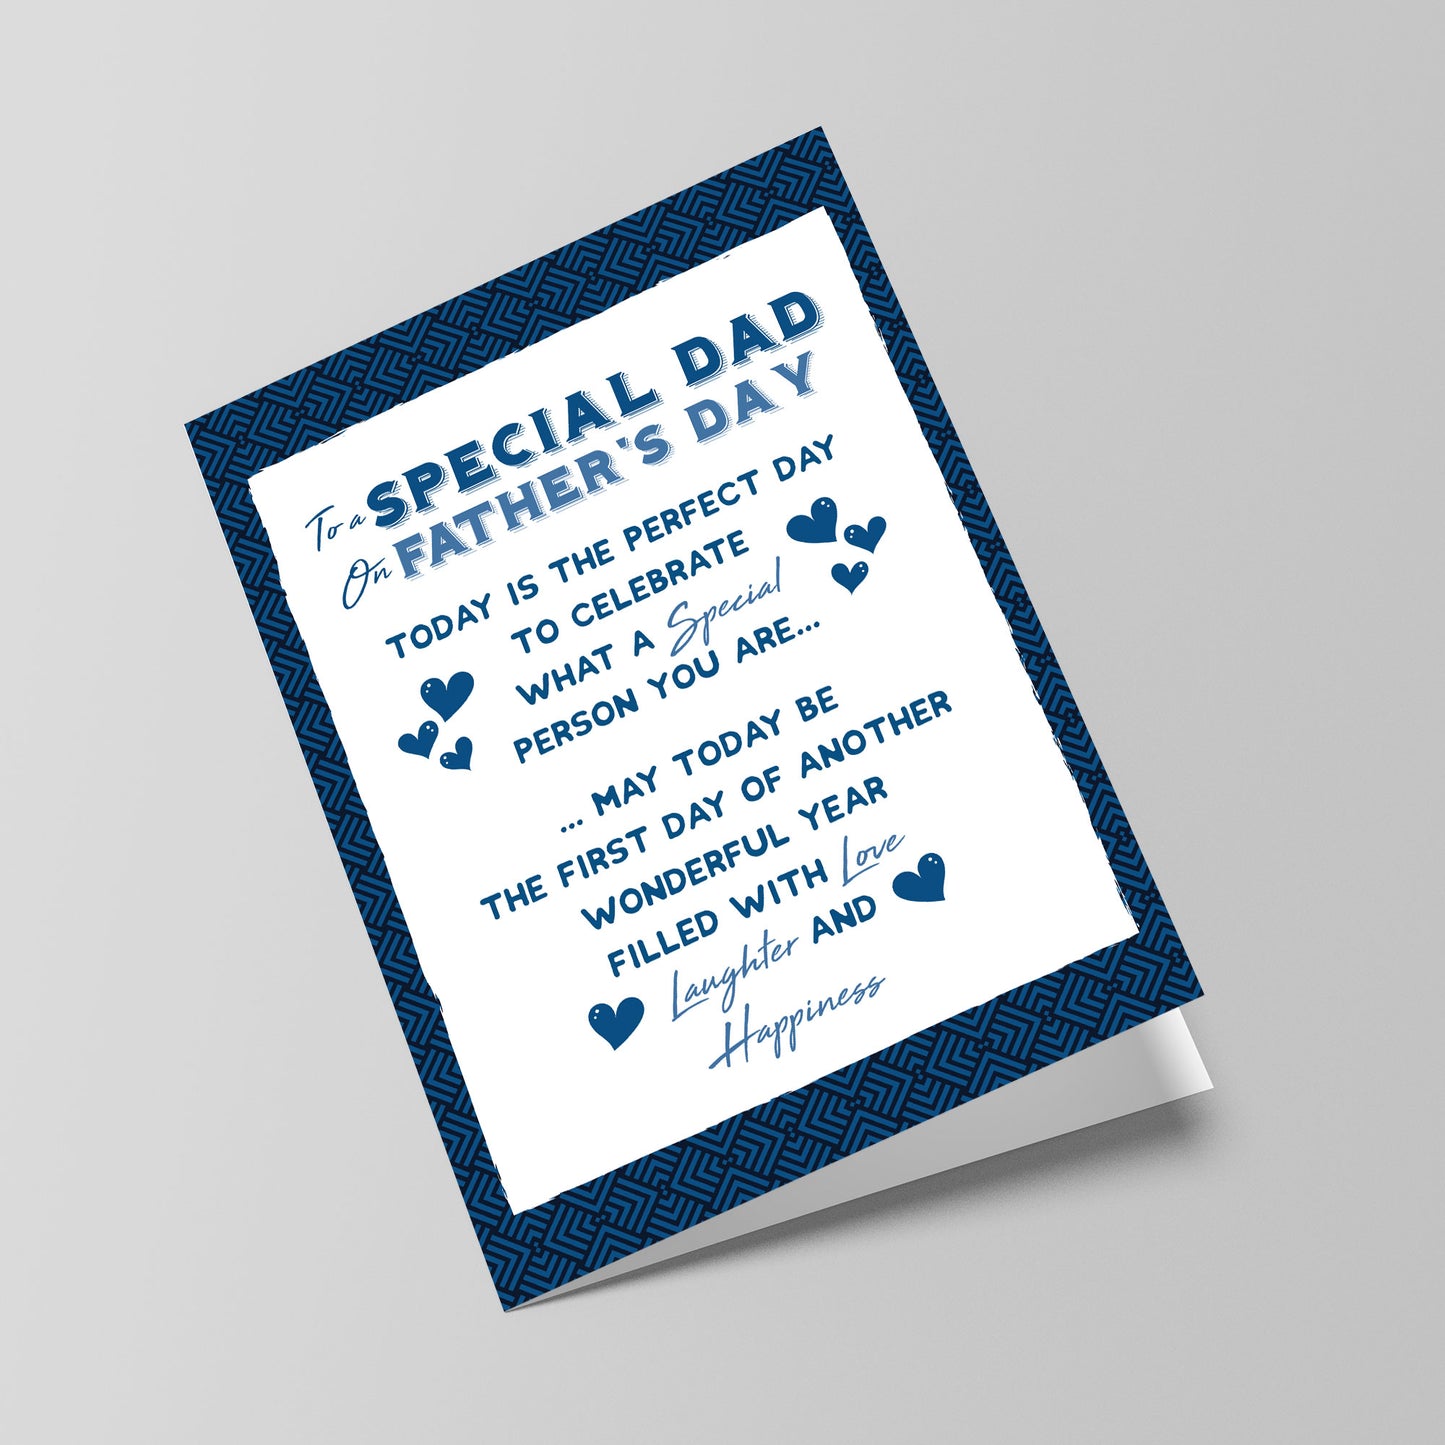 Fathers Day Card For Special Dad Fathers Day Cards Thank You Dad